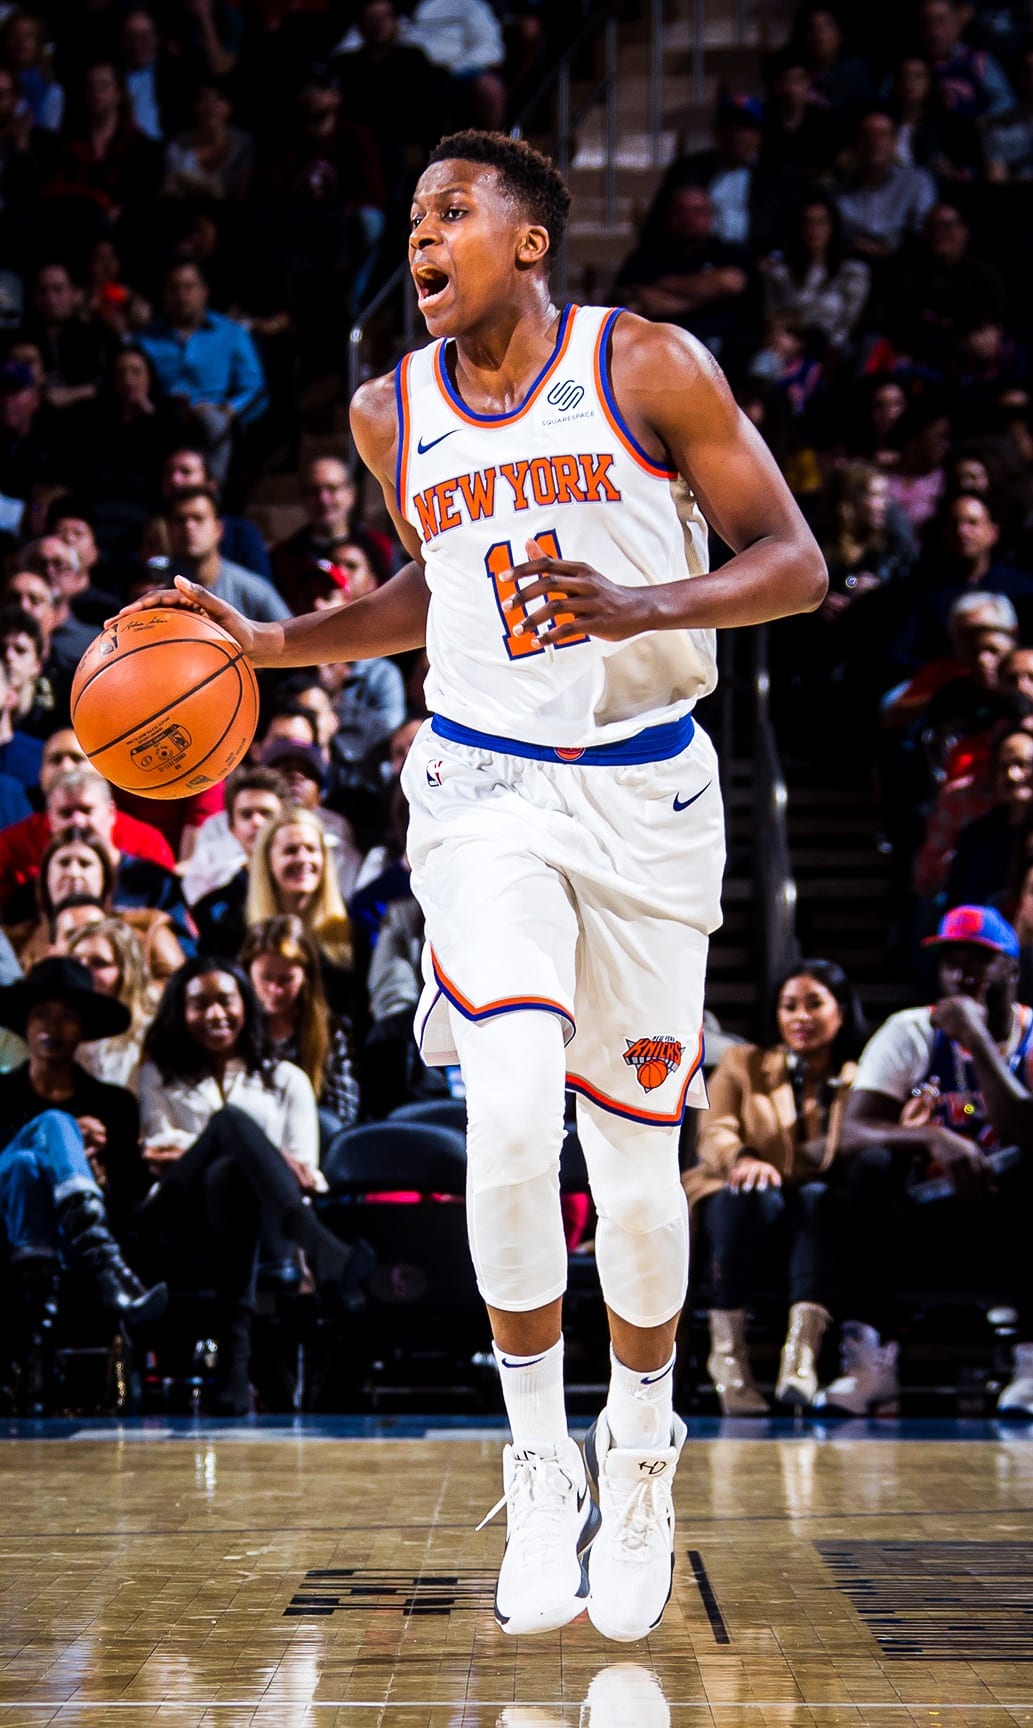 November 3, 2017: The New York Knicks defeat the Phoenix Suns, 120-107, at Madison Square Garden in New York City.